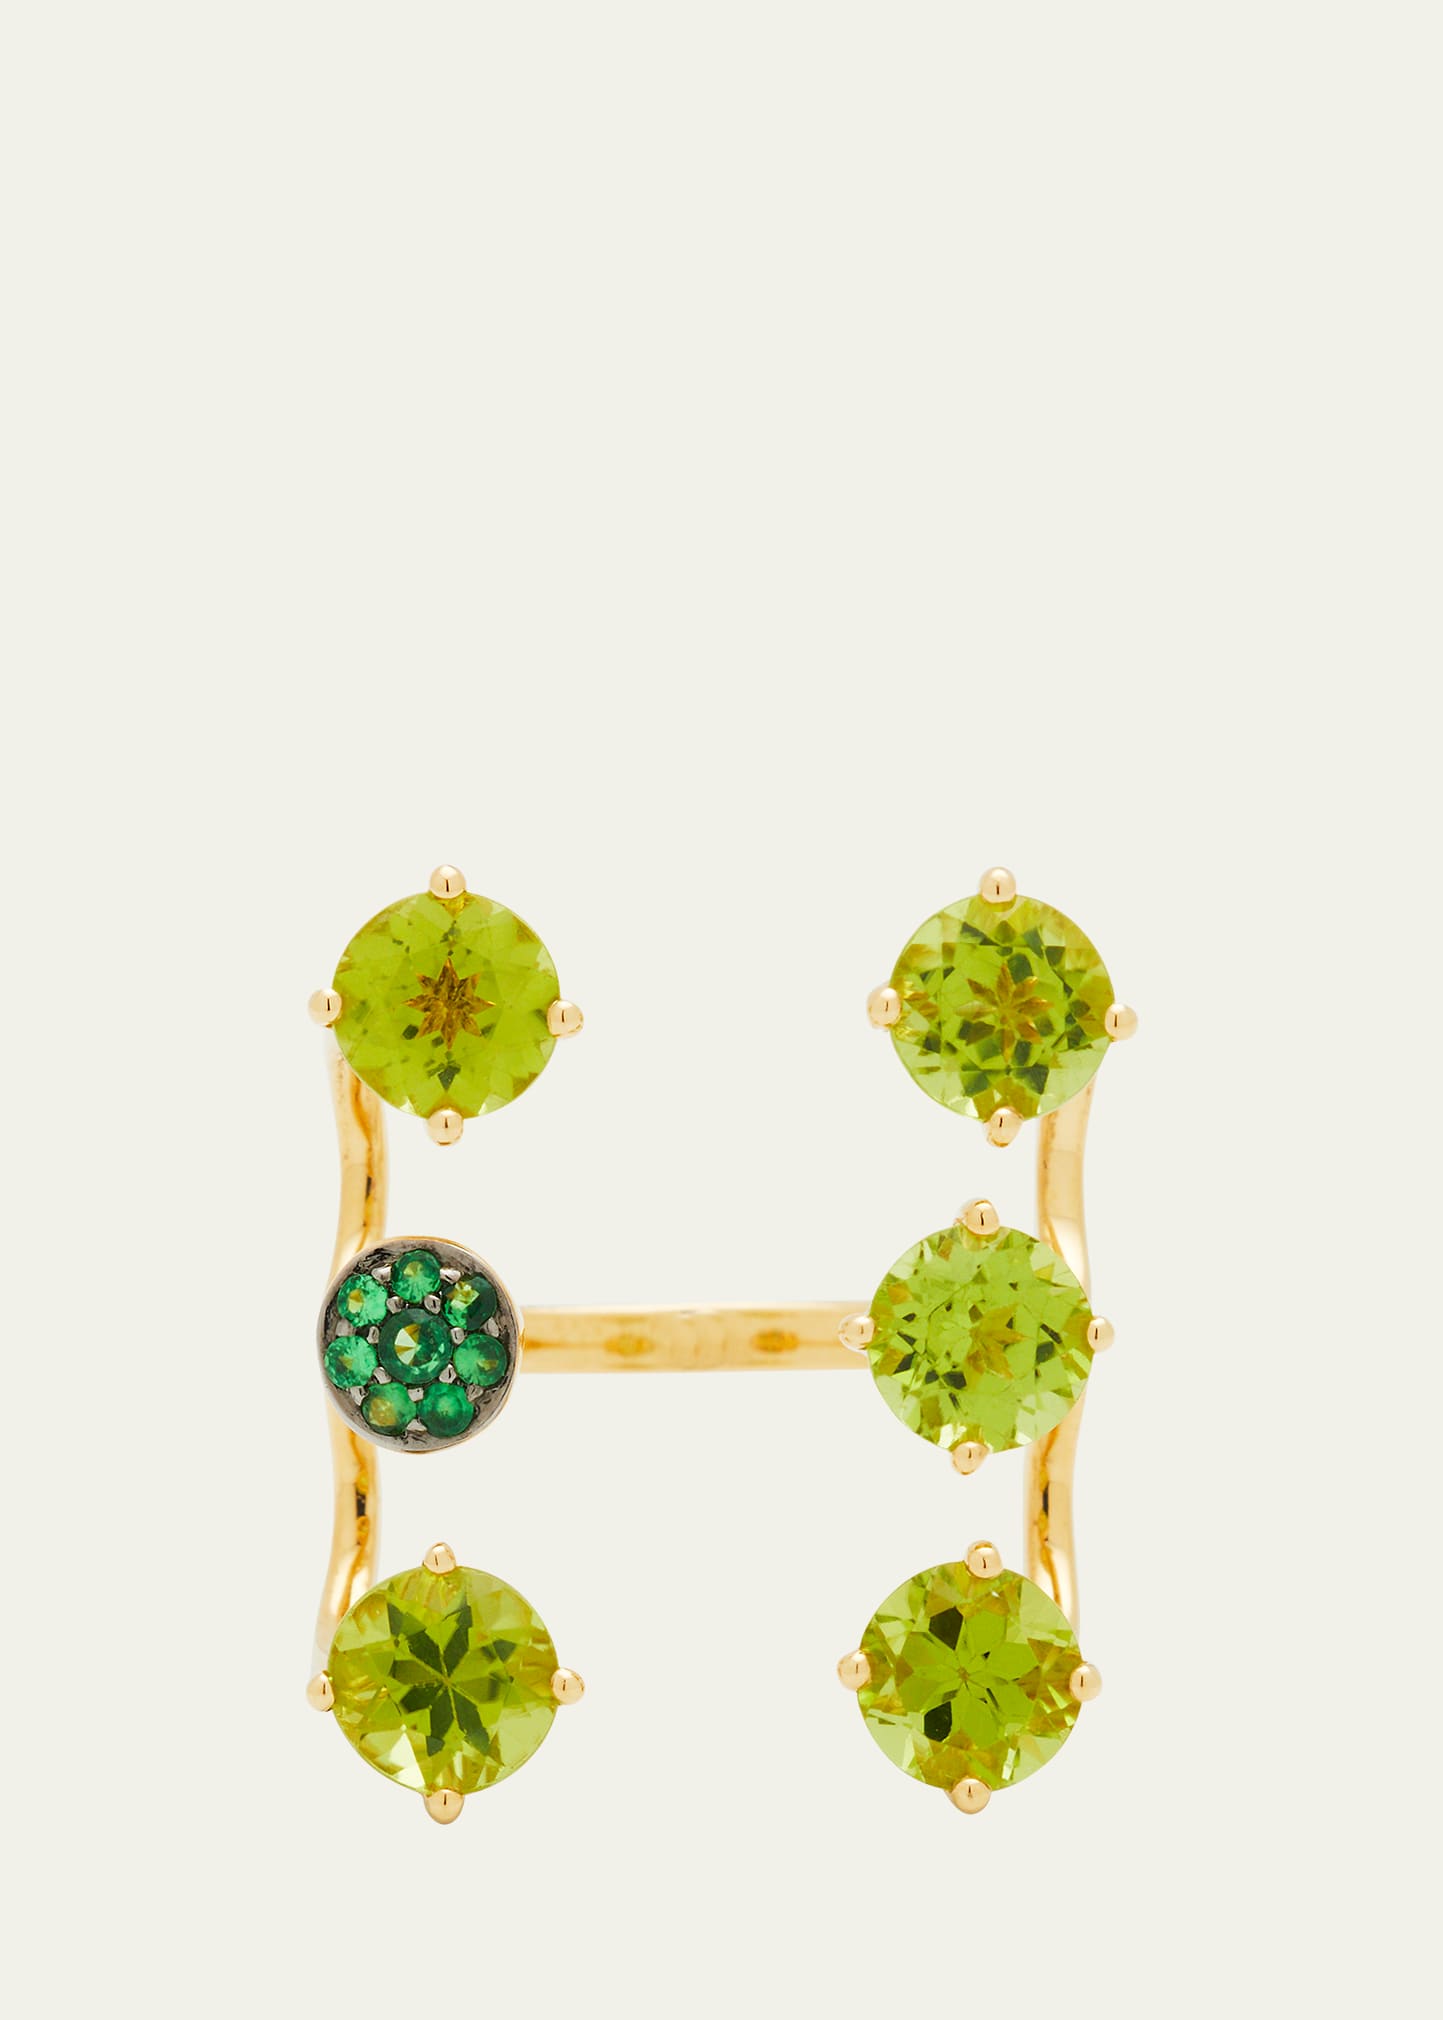 18k Yellow Gold Peridot Ring from Terry Collection, Size 6.5 and 7